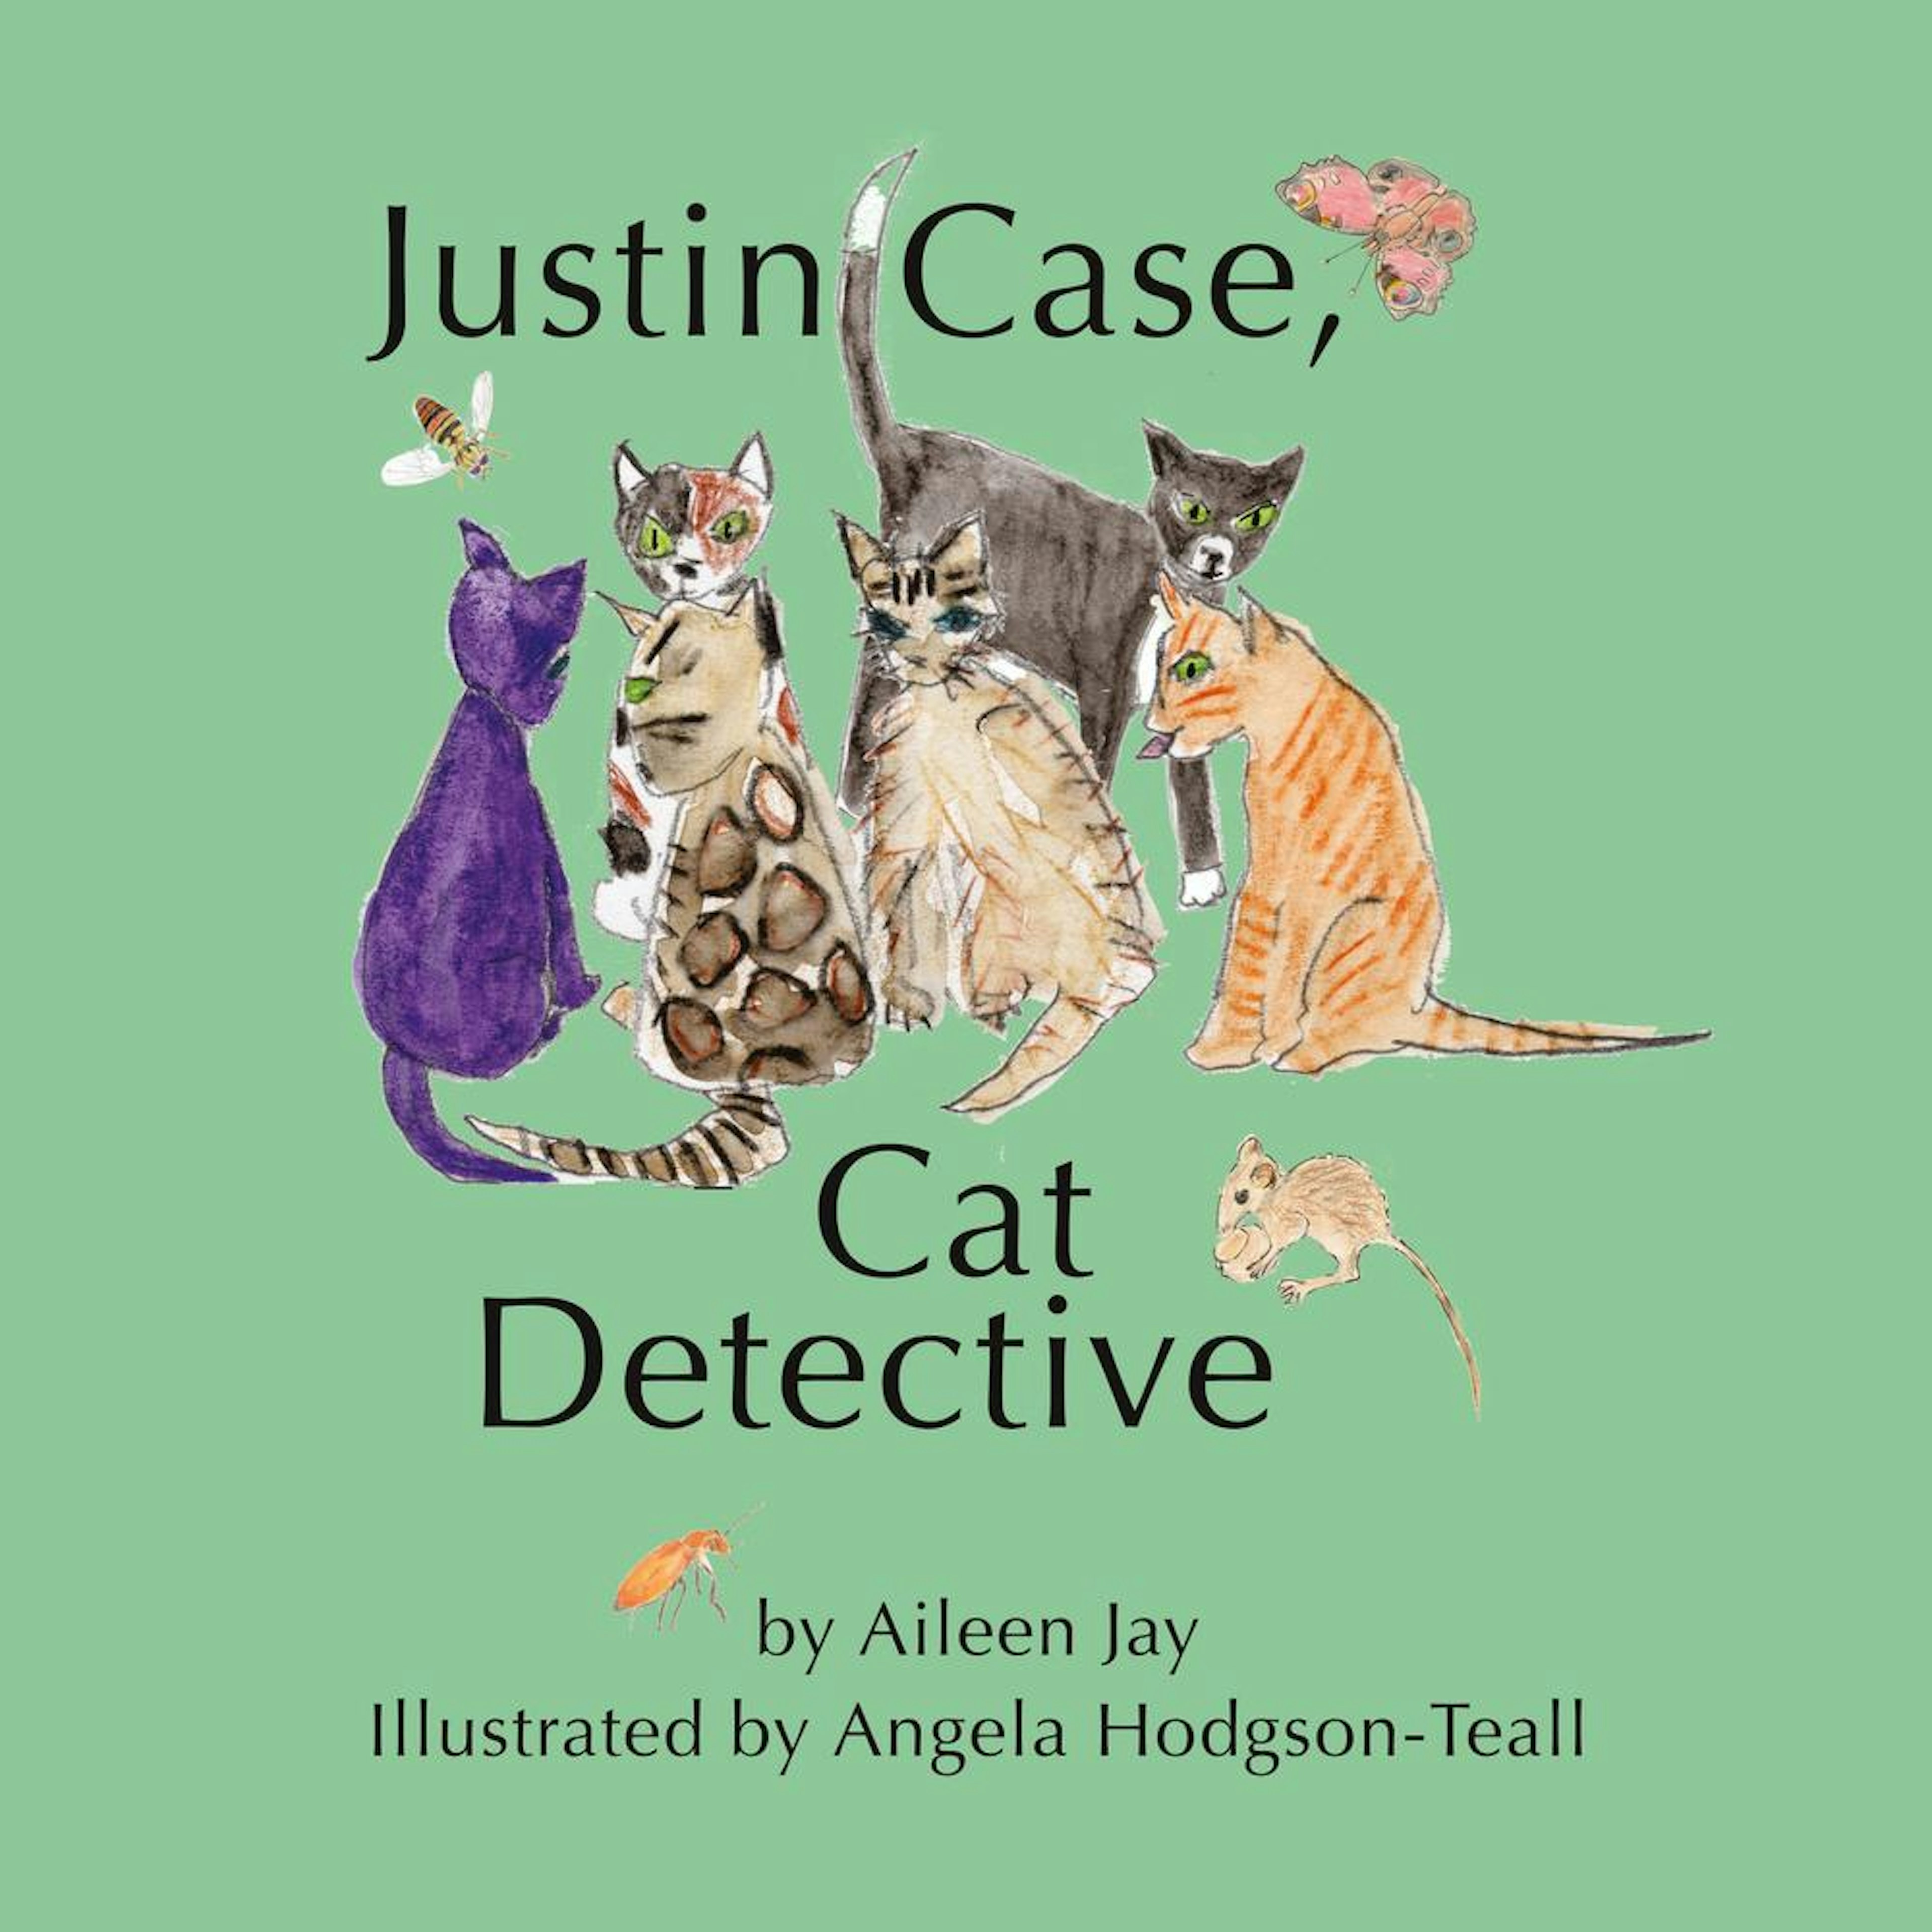 Justin Case, Cat Detective and Other Stories